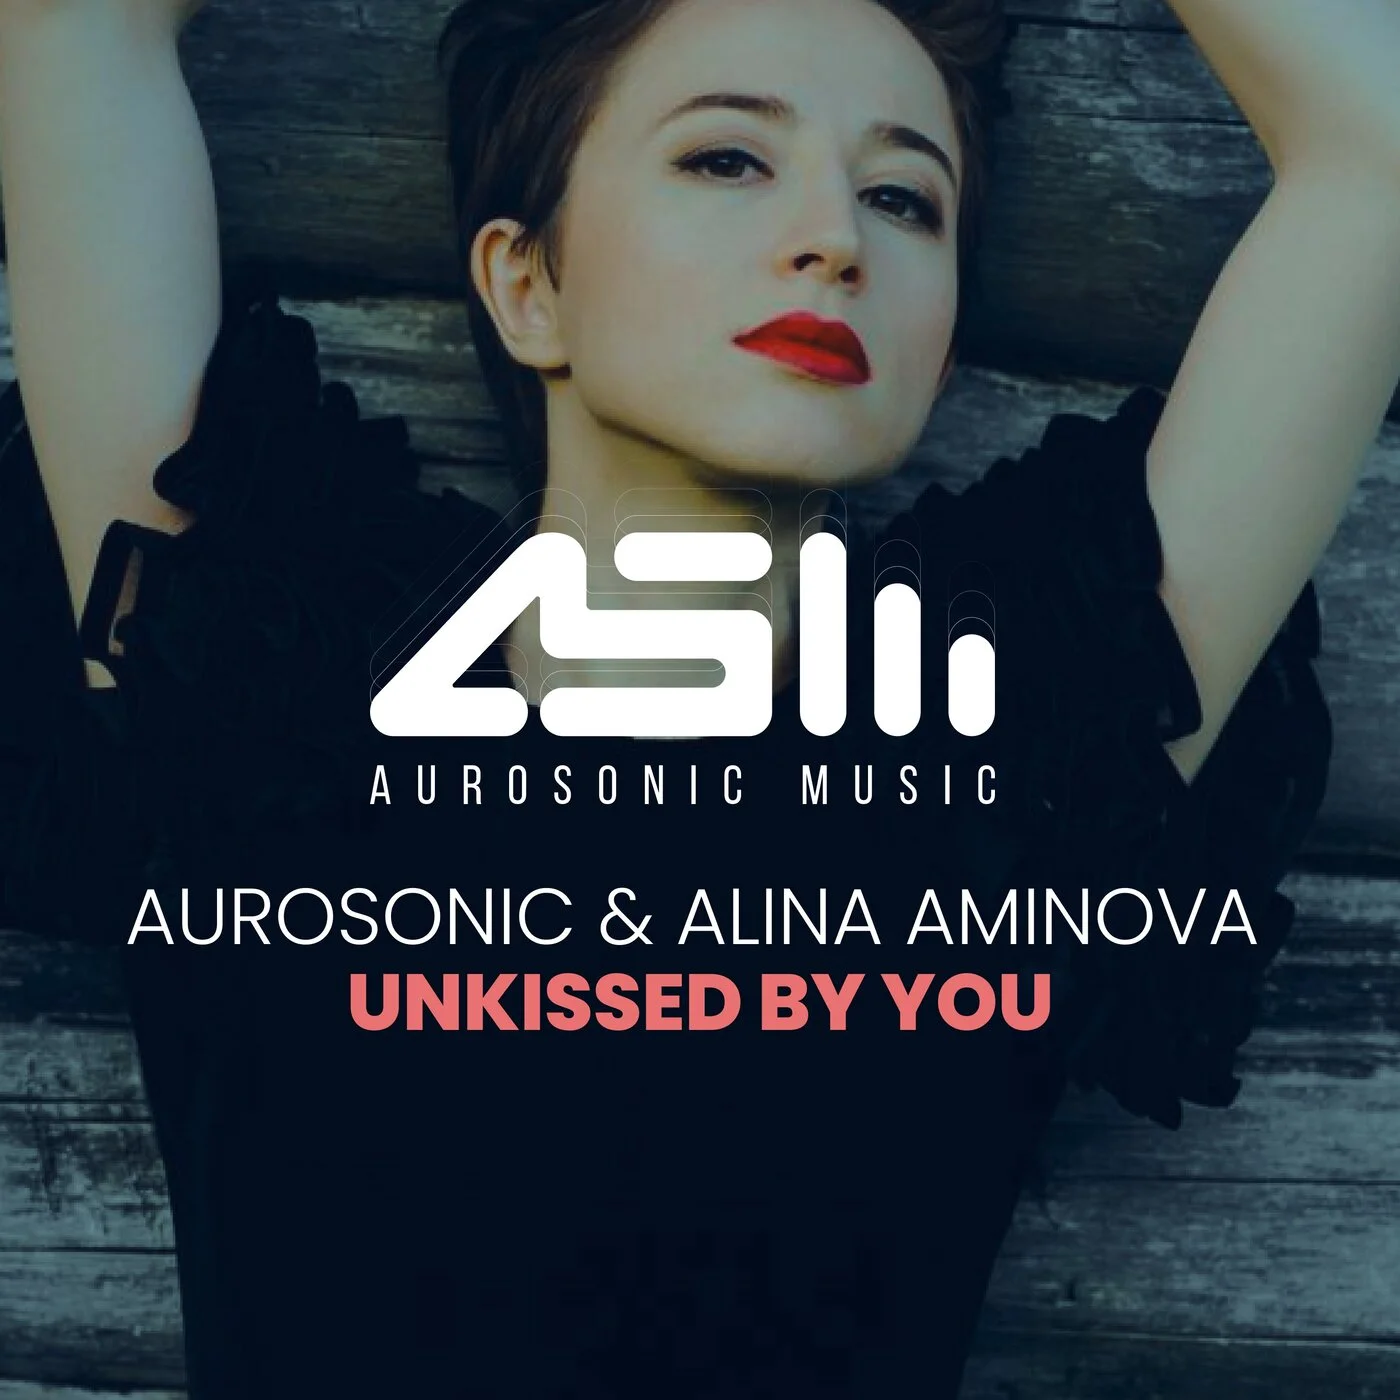 Aurosonic, Alina Aminova - Unkissed by You (Extended)